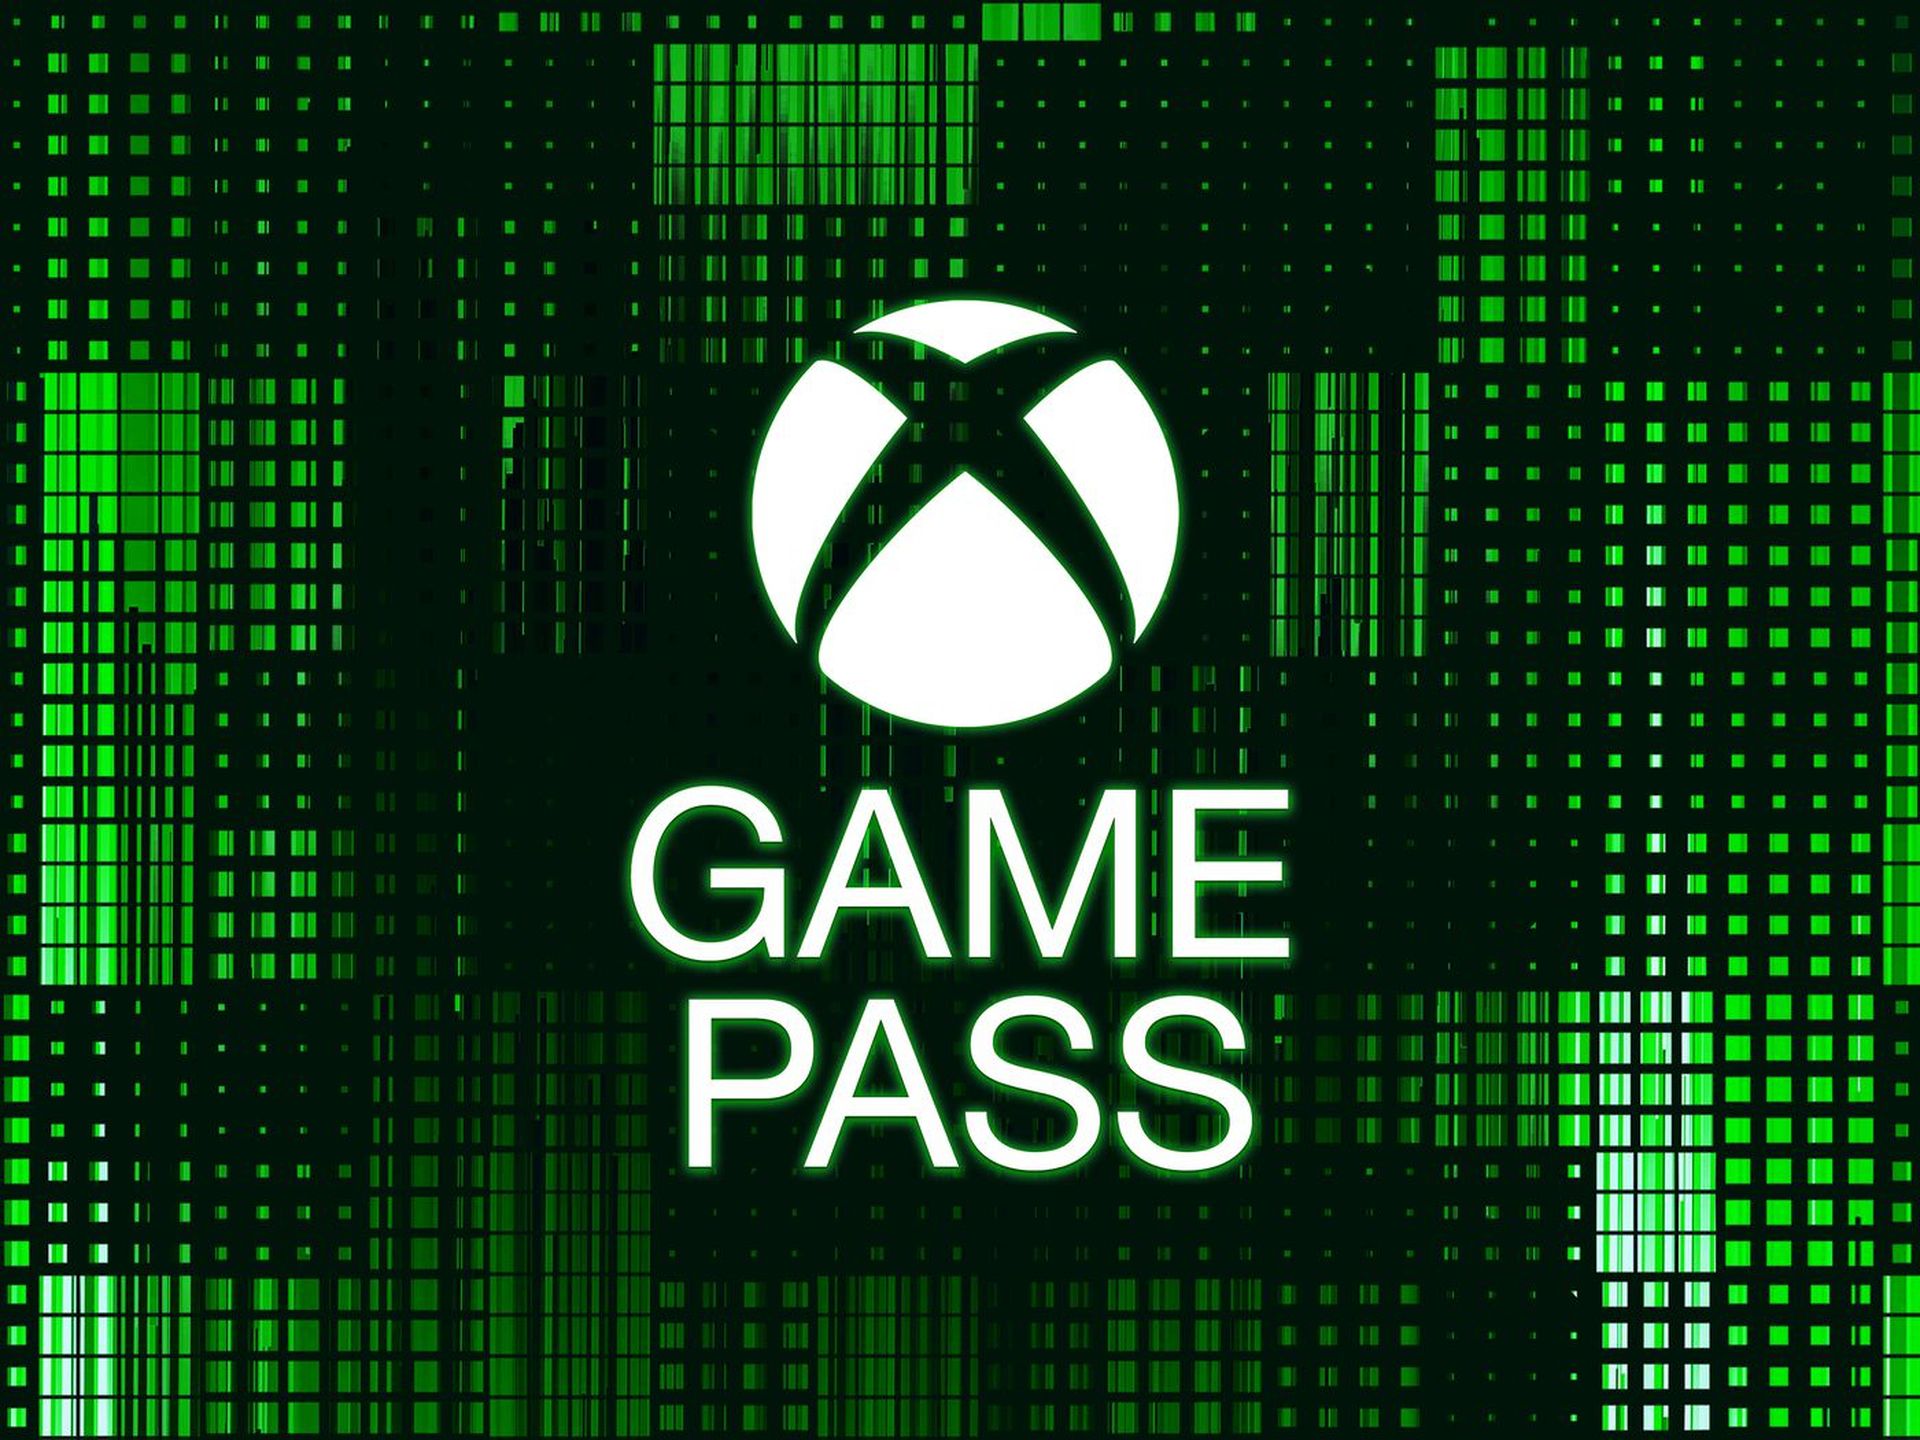 Microsoft went on and acquired Activision Blizzard and so the famous FPS franchise Call of Duty coming to Game Pass for all subscribers to enjoy. 